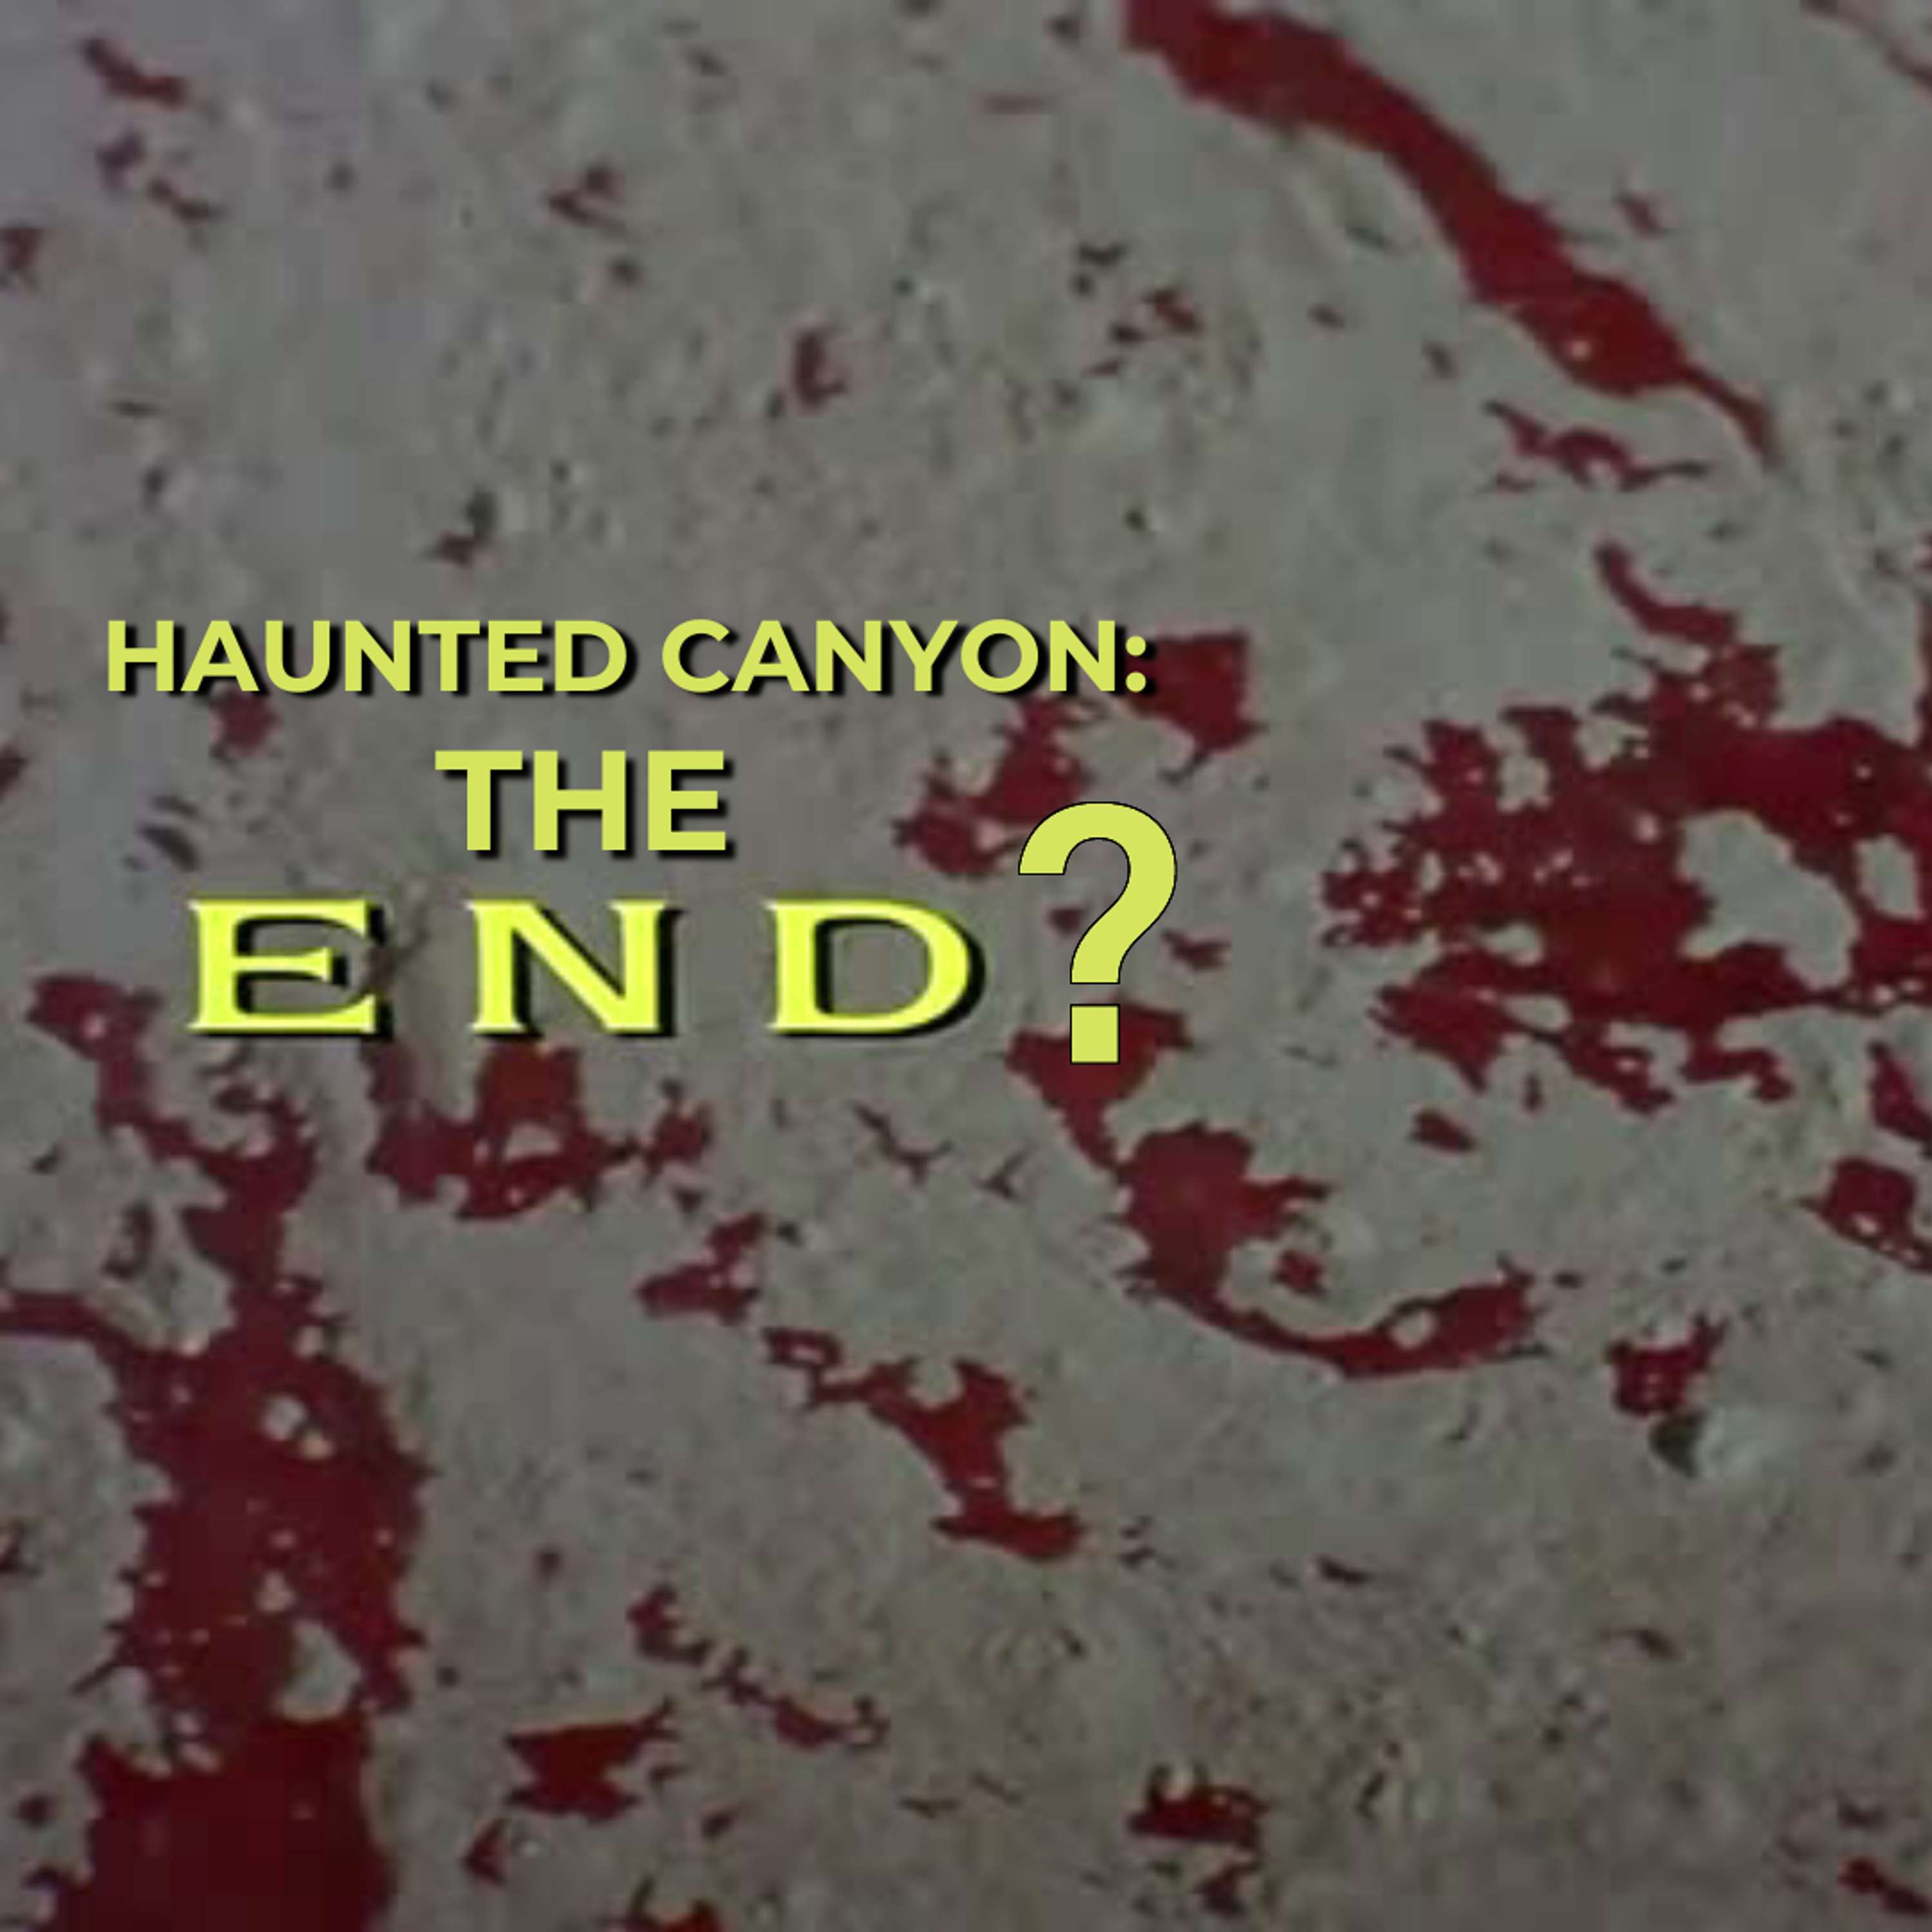 Haunted Canyon: The End?